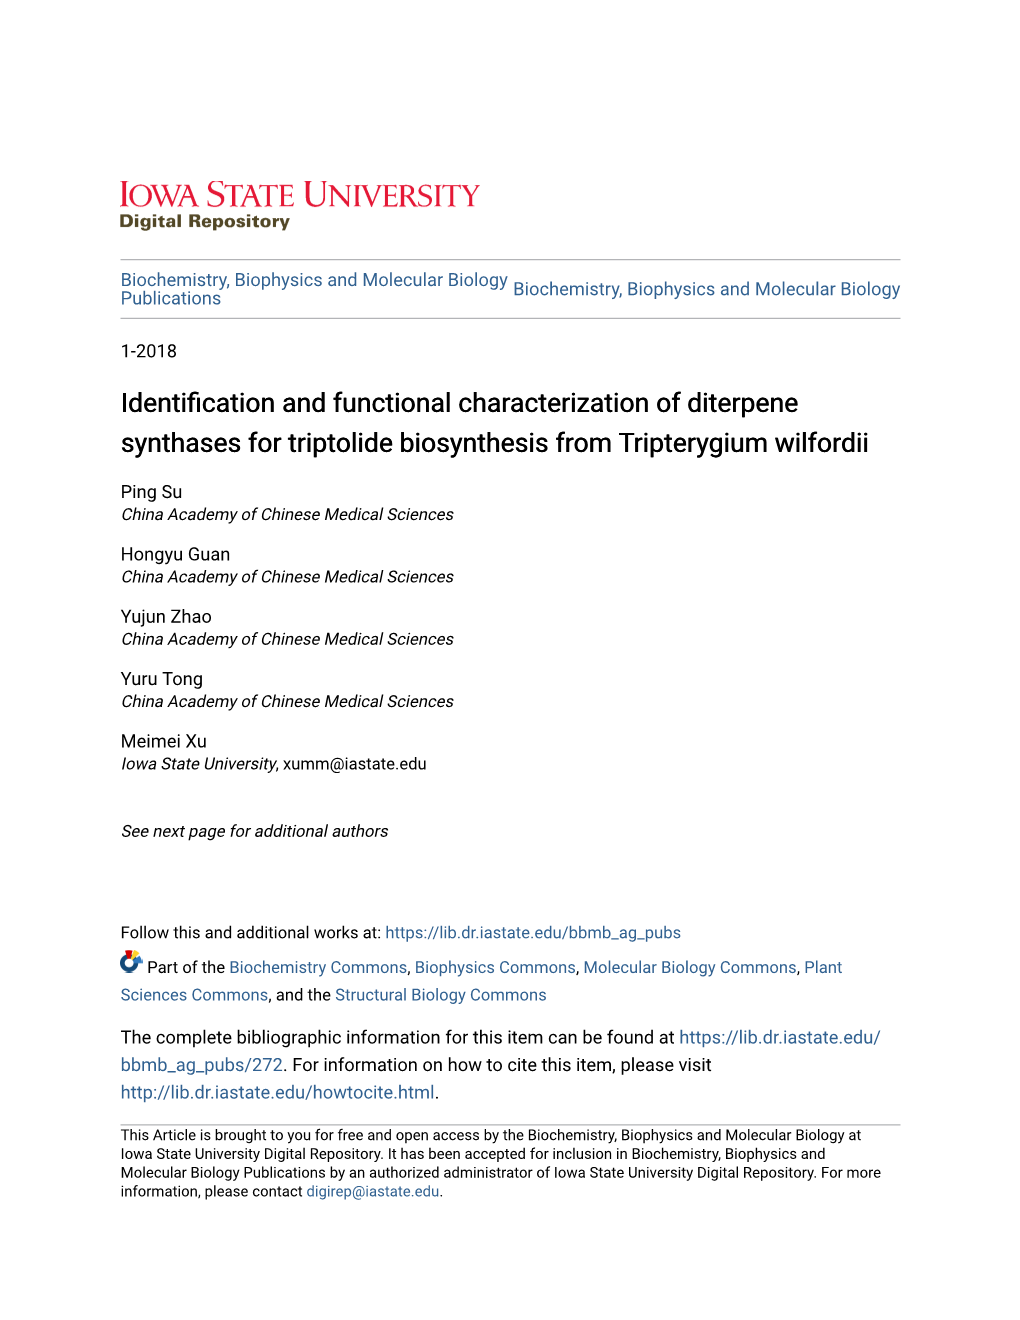 Identification and Functional Characterization of Diterpene Synthases for Triptolide Biosynthesis from Tripterygium Wilfordii